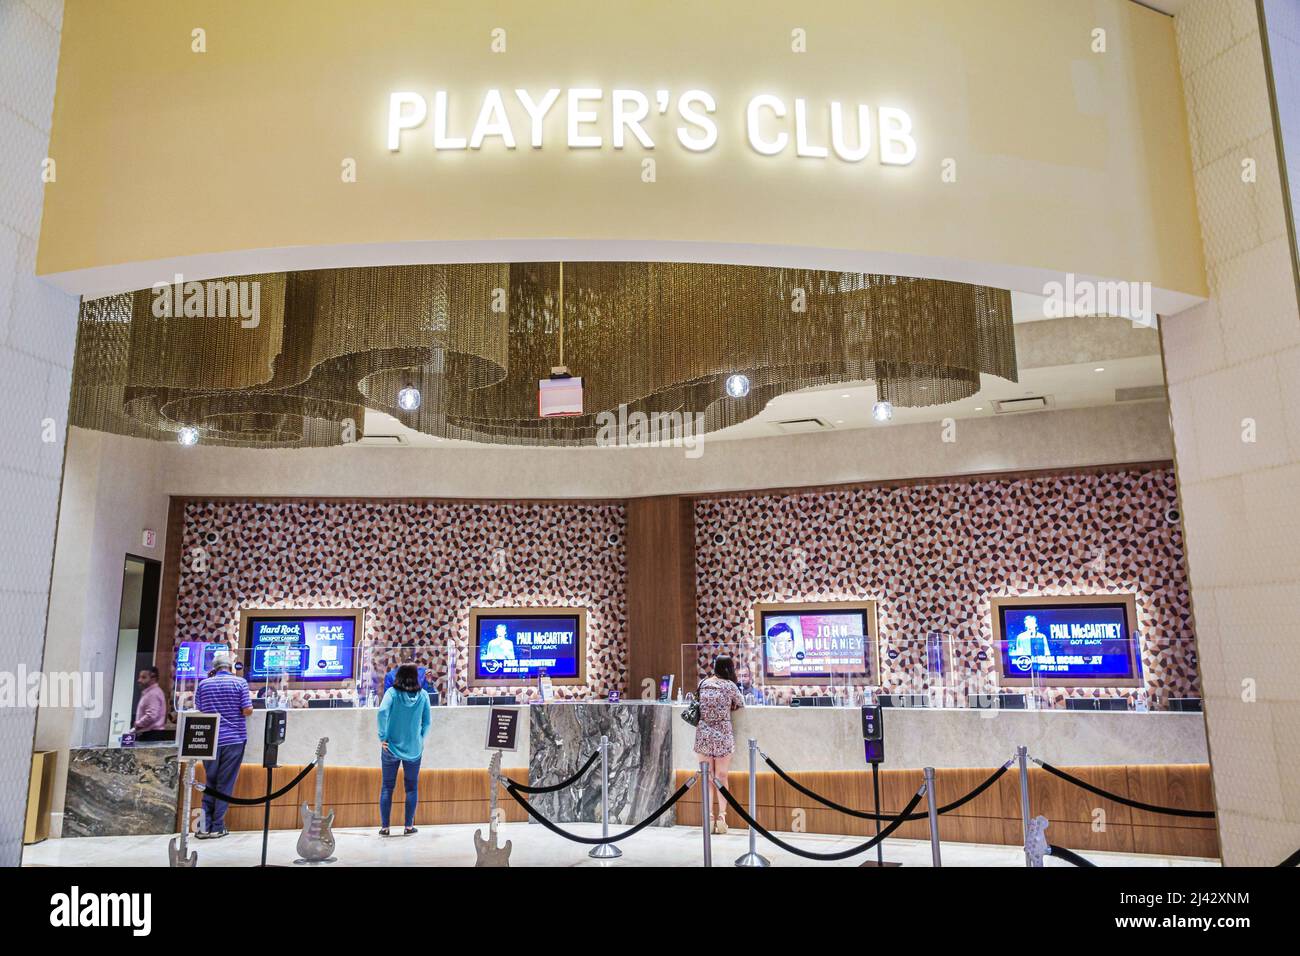 Hollywood Florida Seminole Hard Rock Hotel & Casino tribe tribal reservation inside interior Player's Club counter members privileges Stock Photo